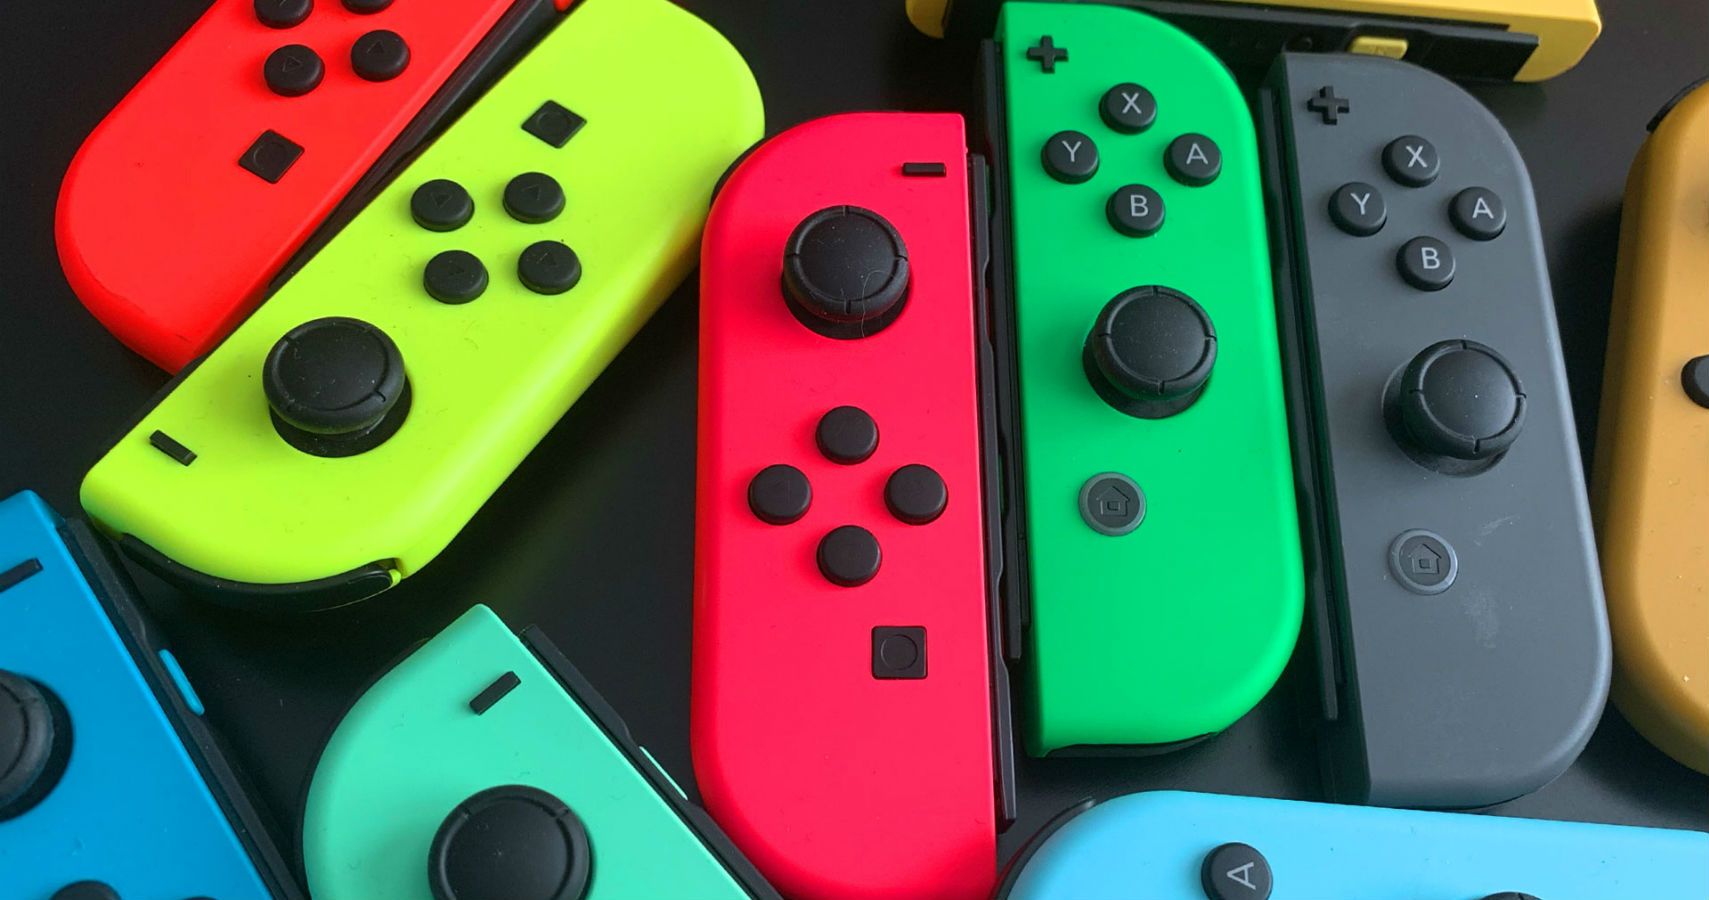 Nine European Consumer Groups Have Joined Forces To Investigate Joy-Con ...